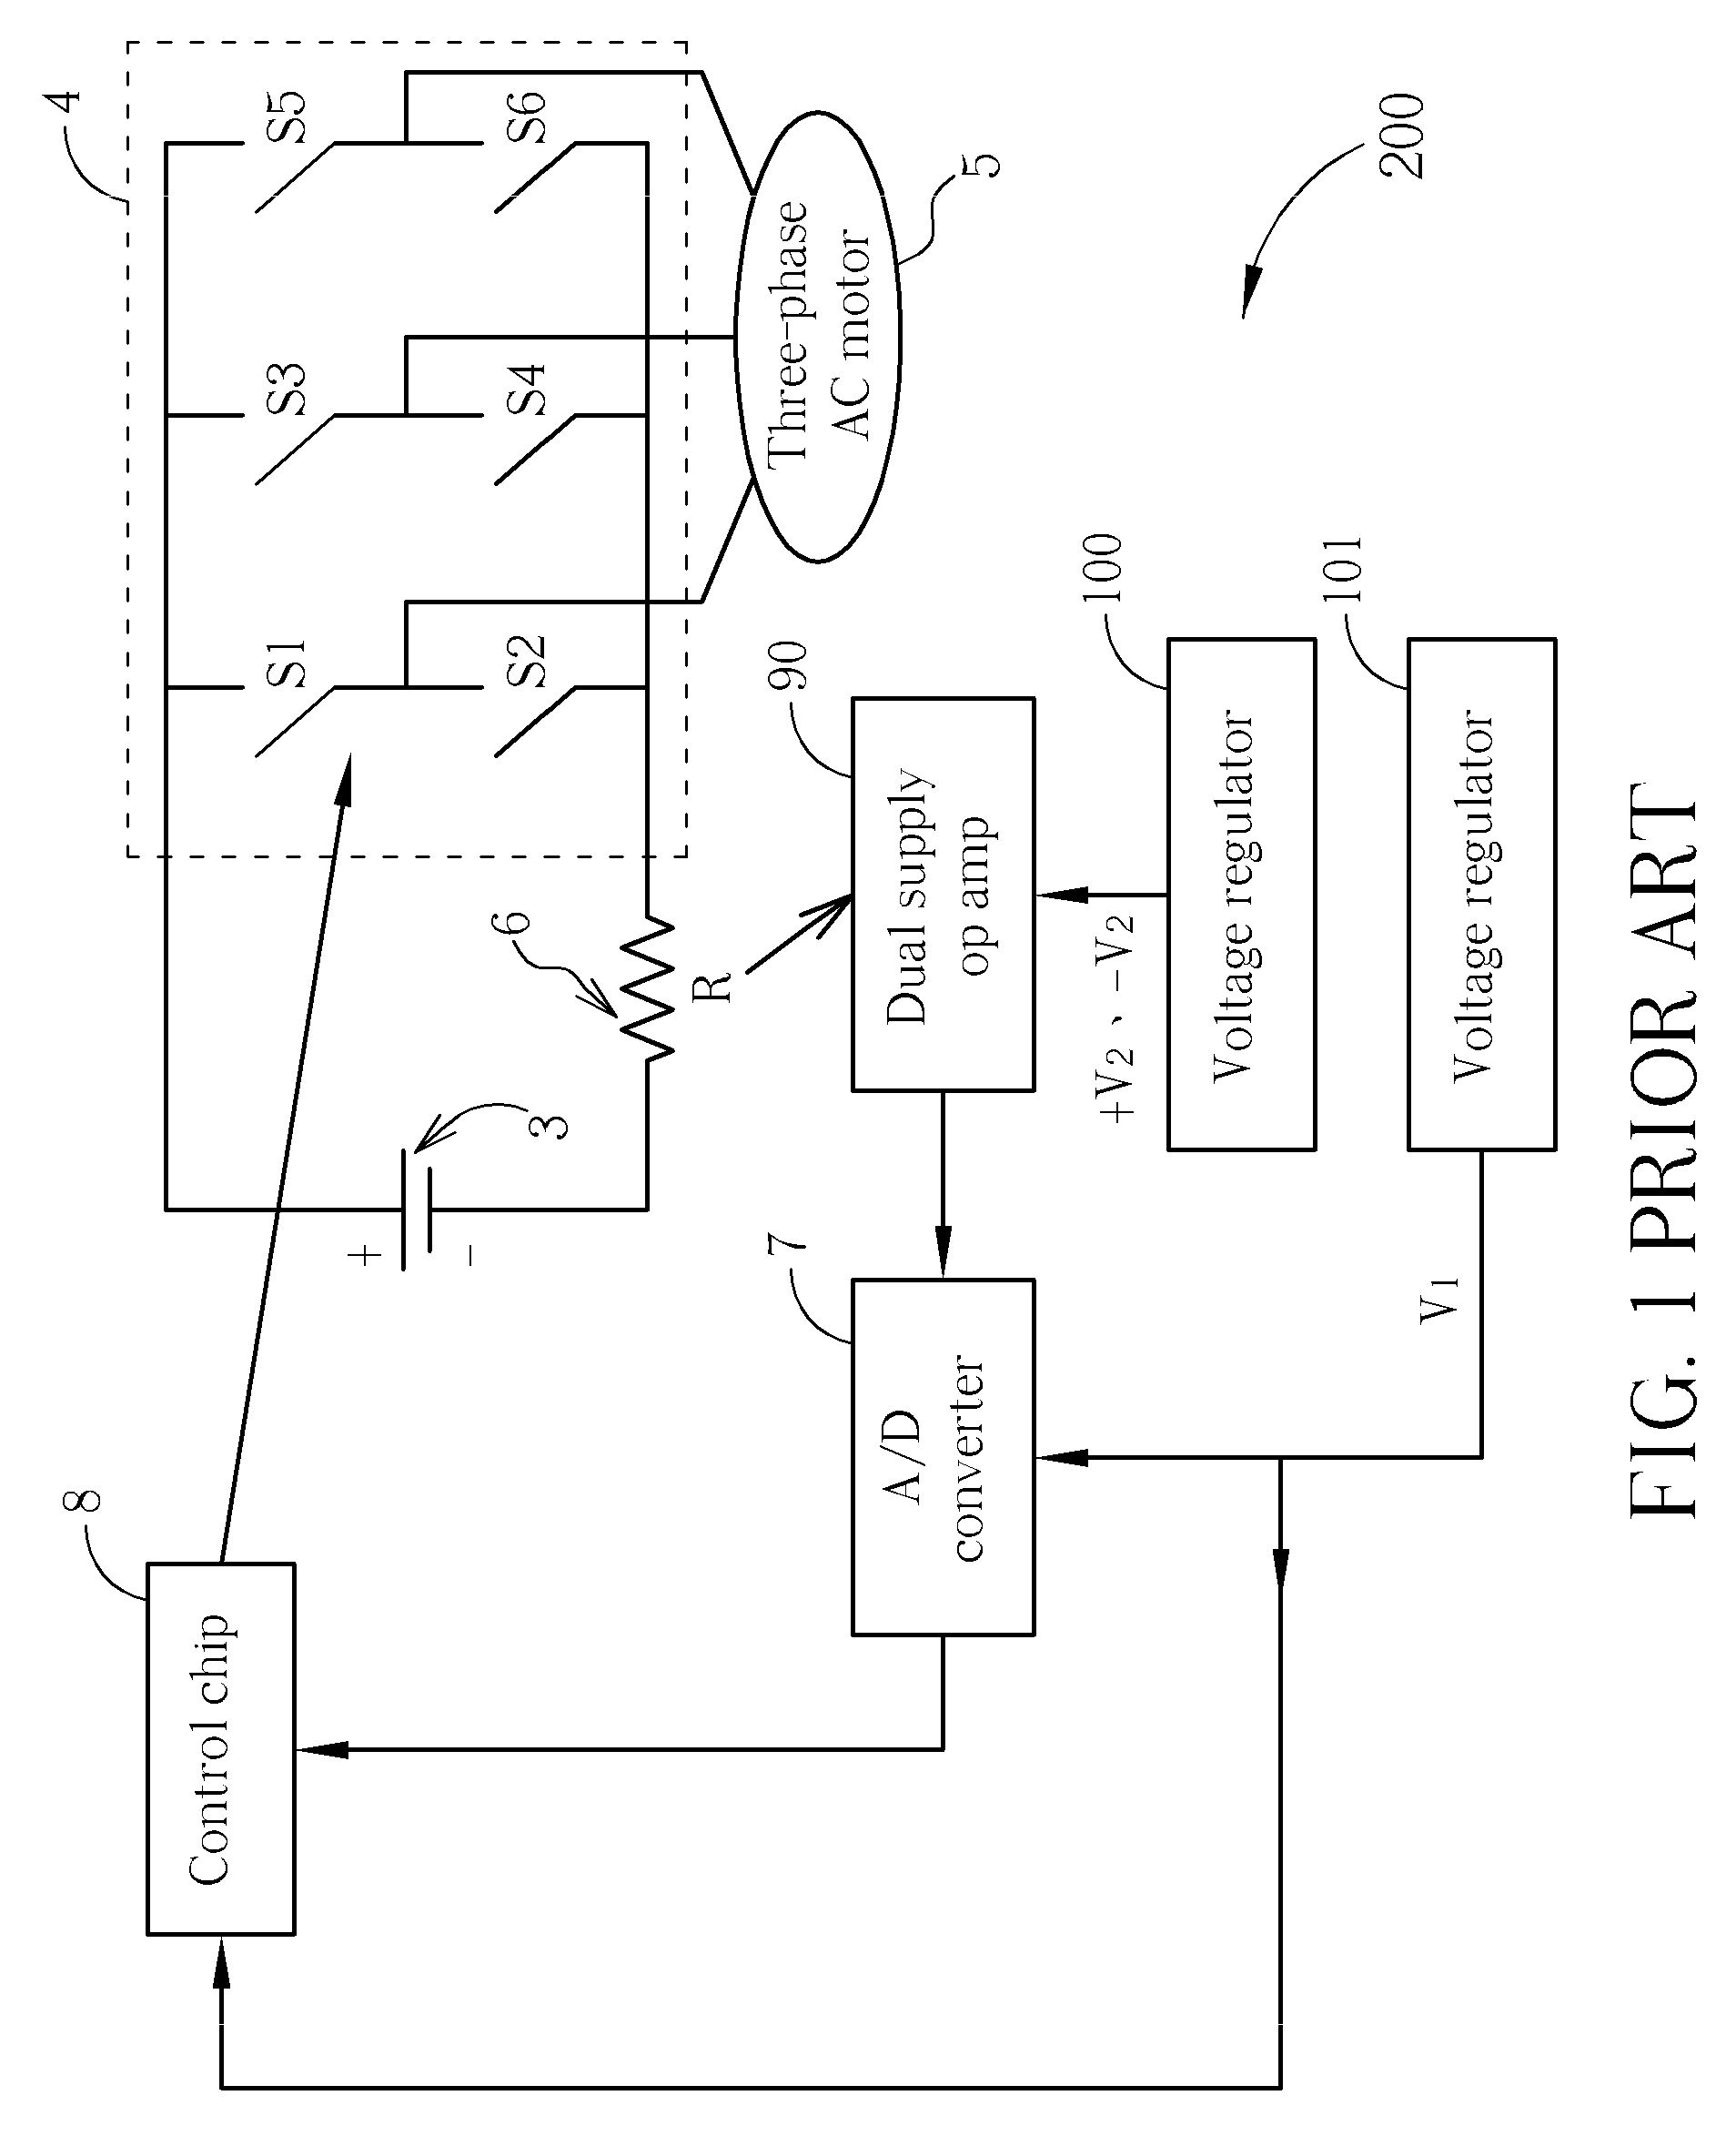 To Obtain the Three-Phase Current via adjusting width of pulses with Single DC-Link Current Sensor